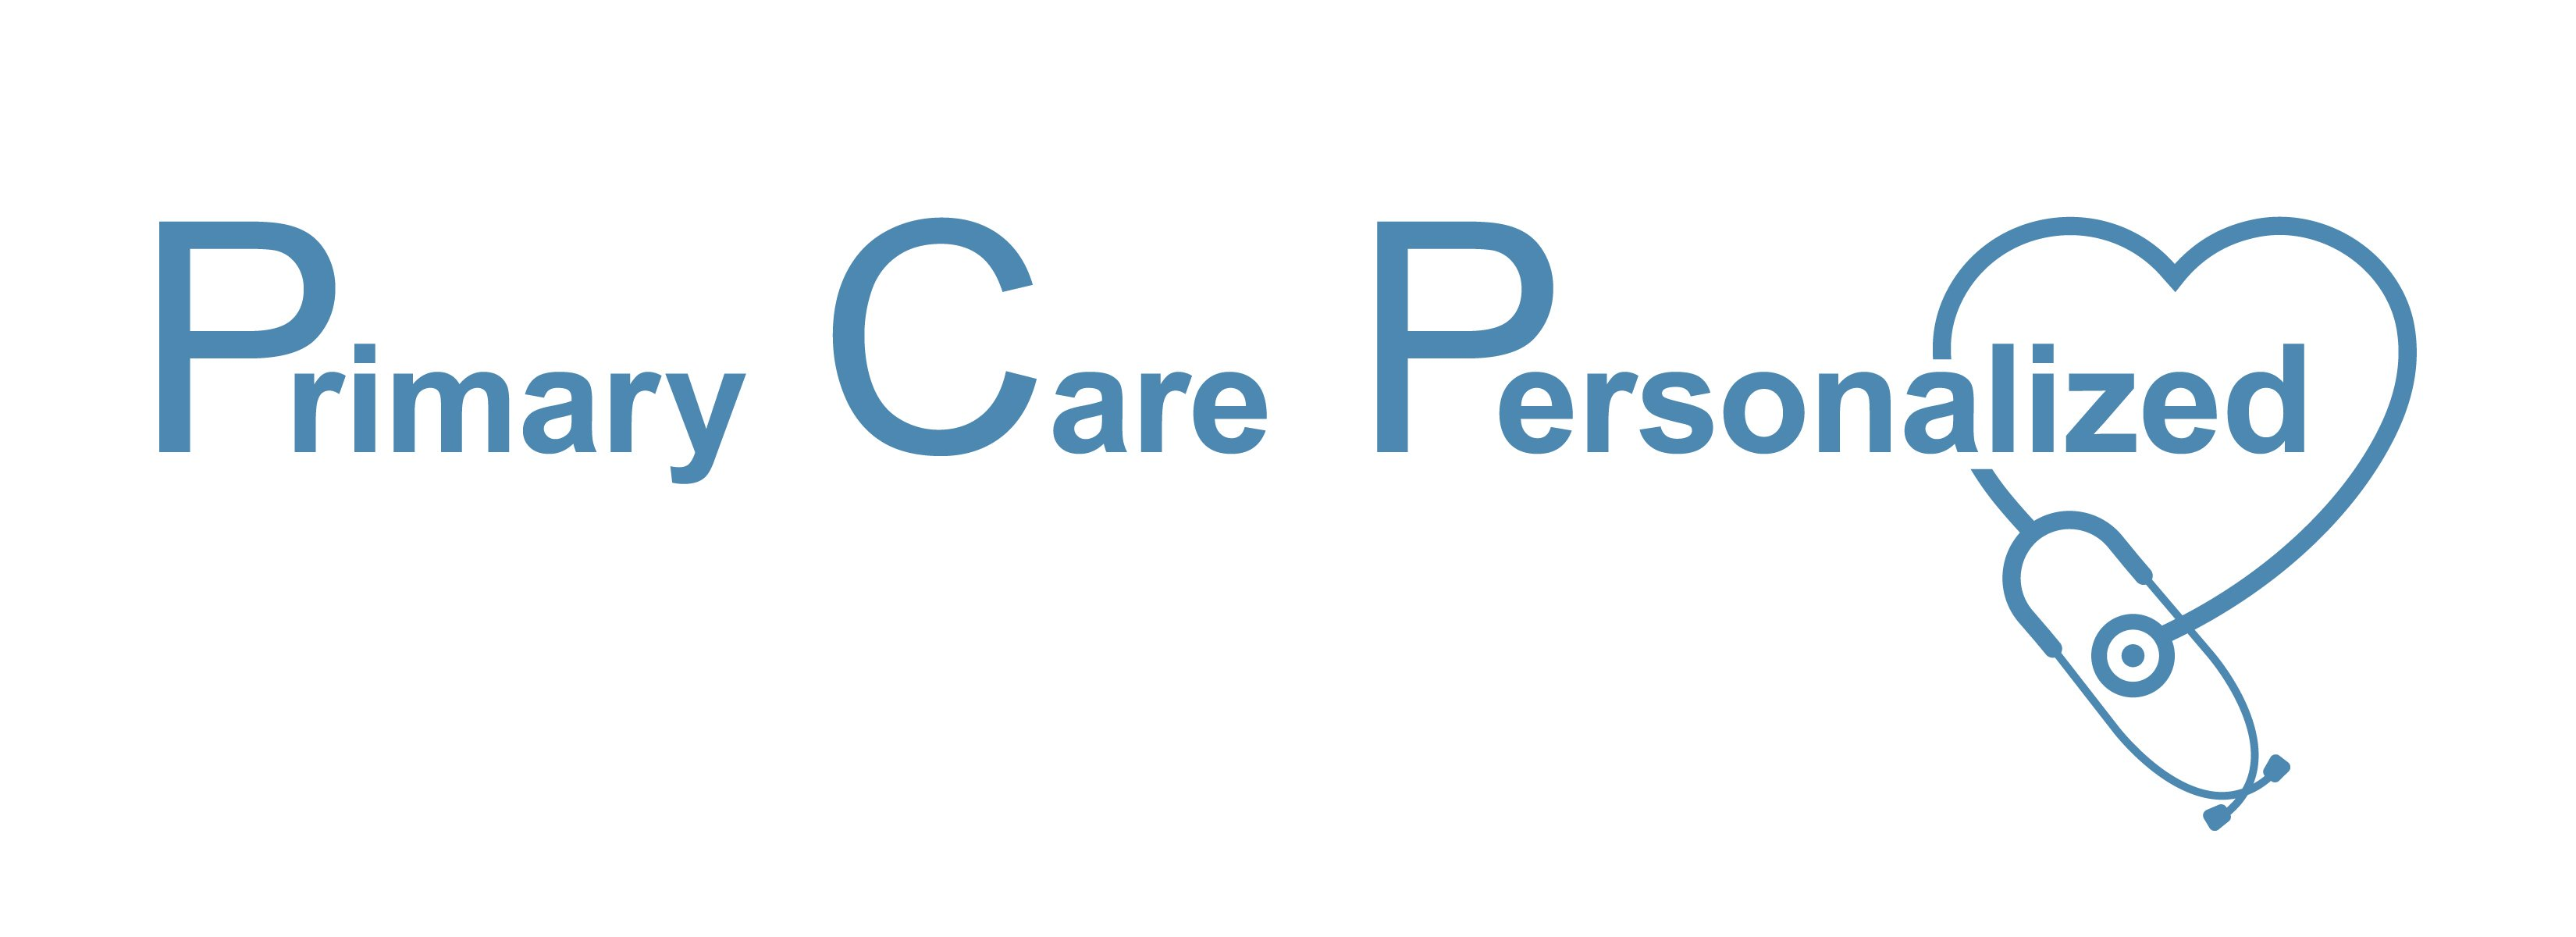  PRIMARY CARE PERSONALIZED